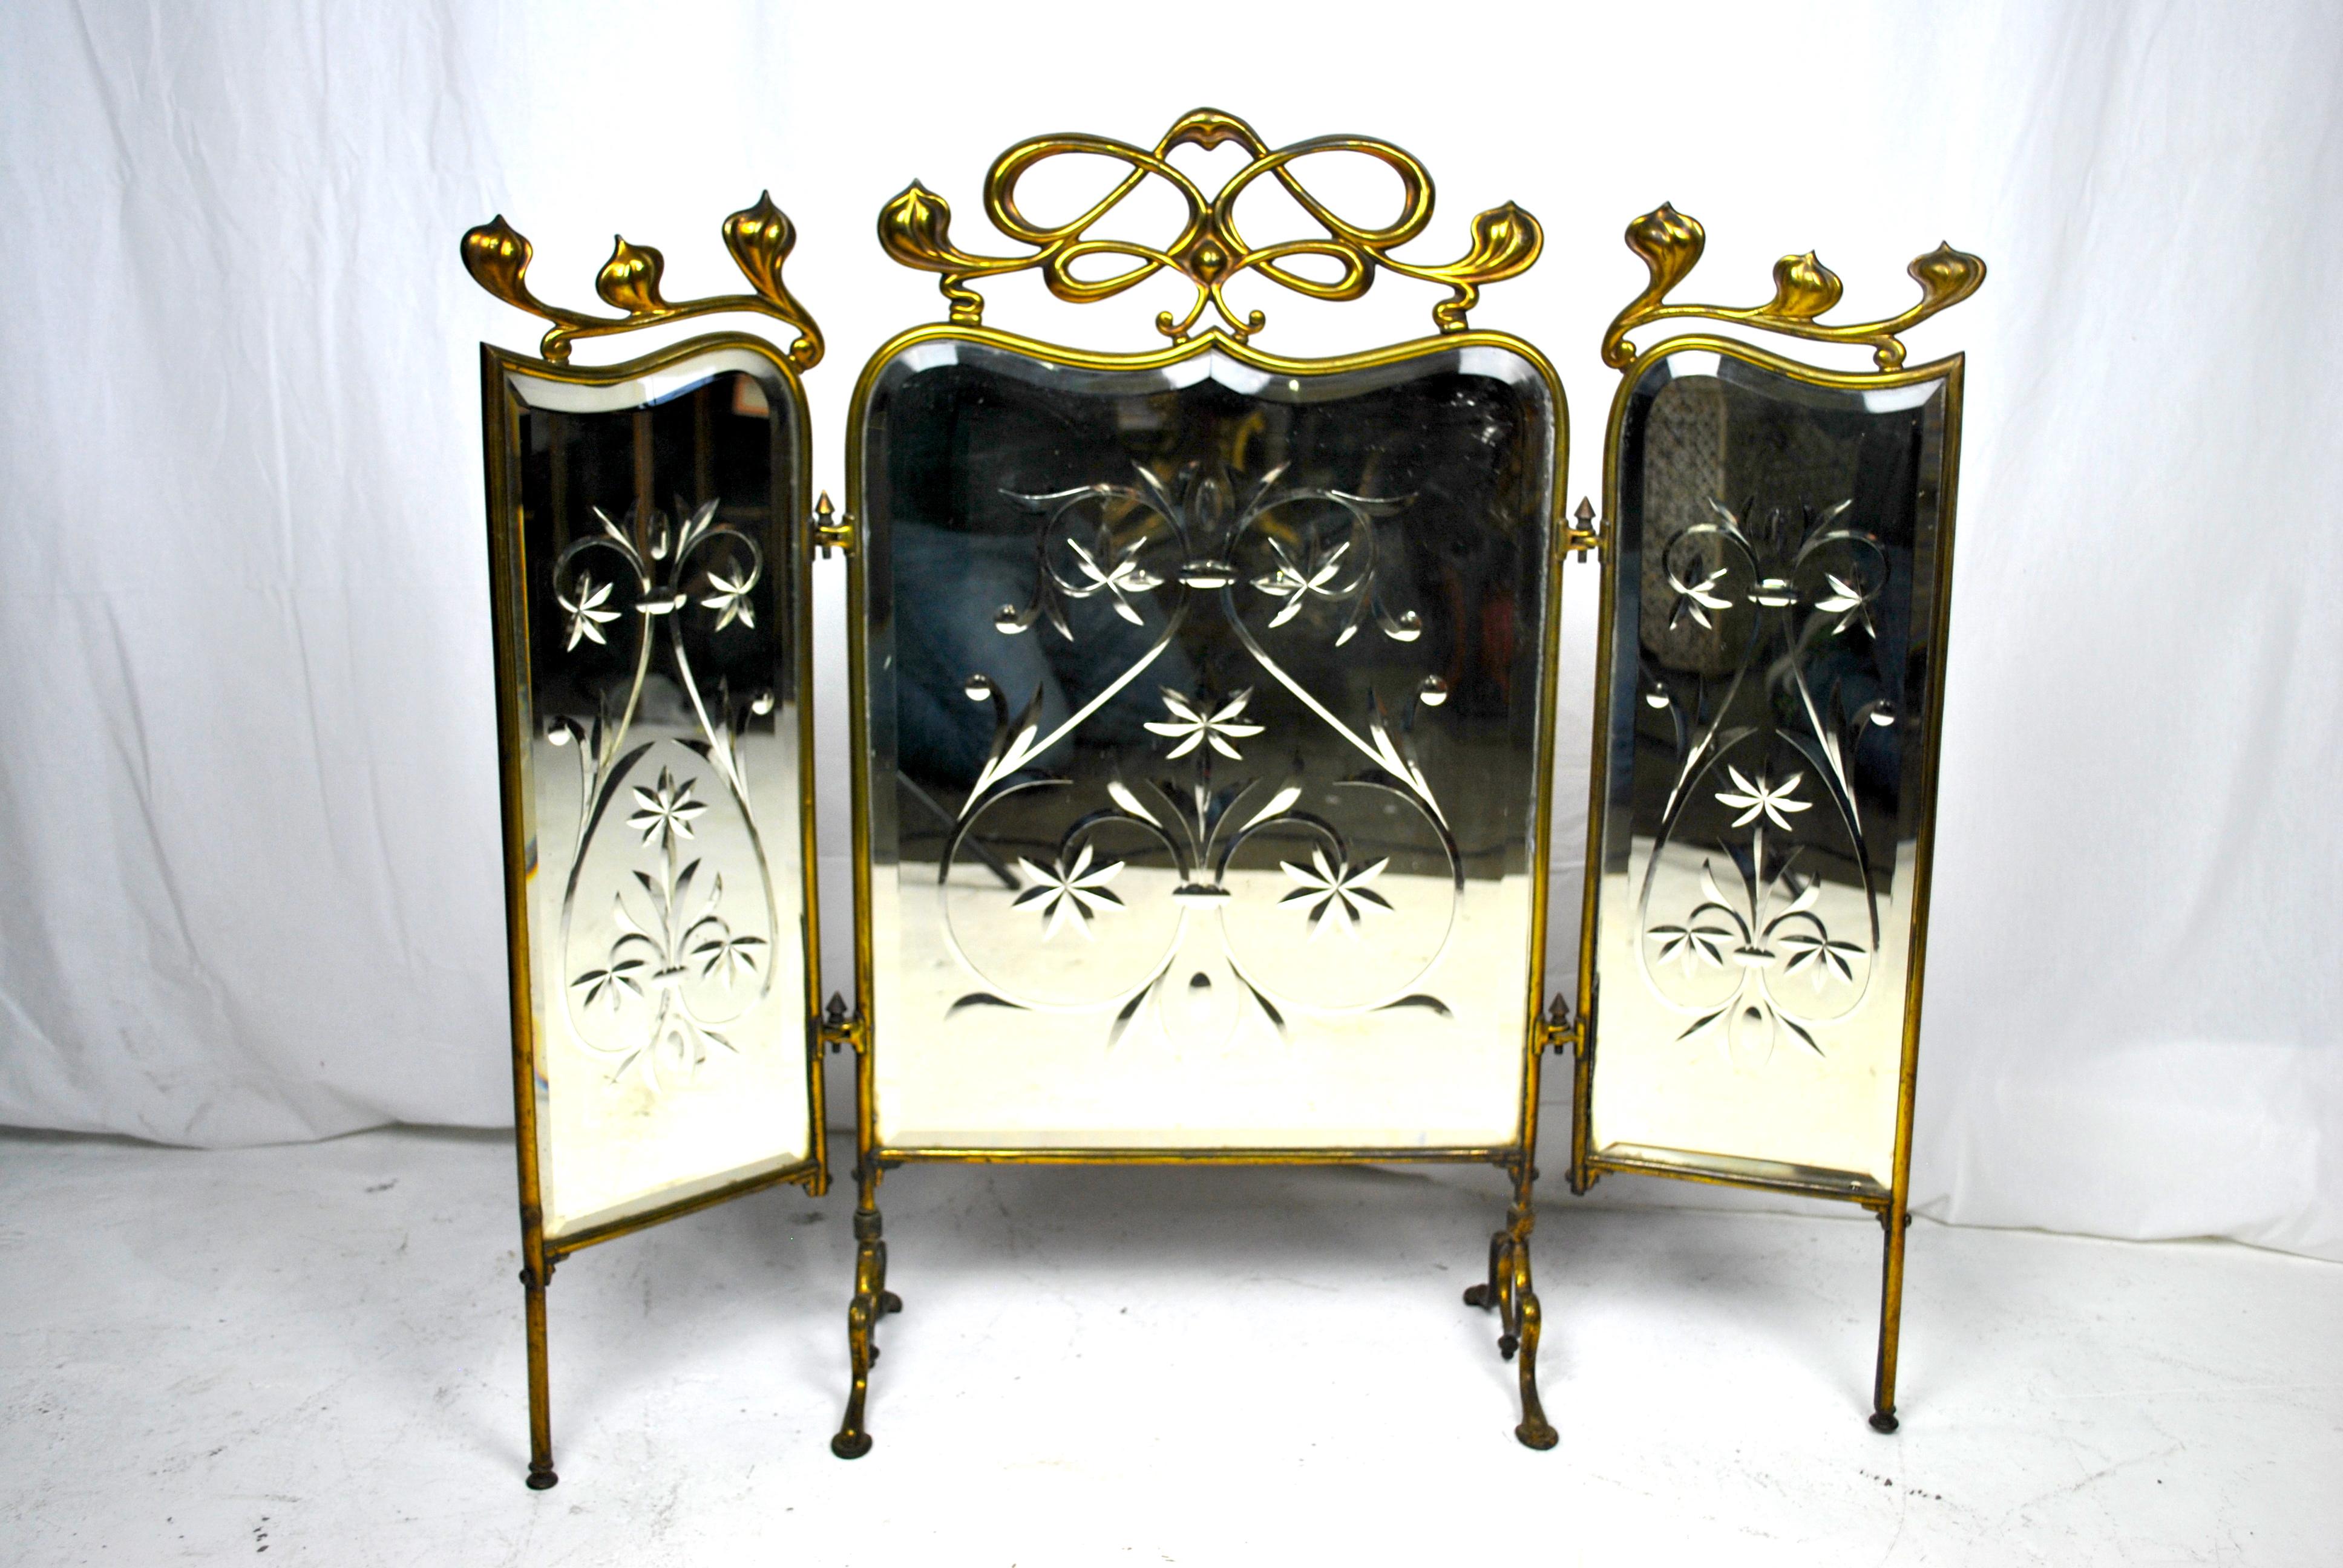 A beautiful and original Art Nouveau fire screen. A three-piece hinged mirrored Art nouveau fire fender screen. The screen has a highly stylized brass gold gilt frame that has Art Nouveau detailing, a flowing top handle and splayed feet. Each of the